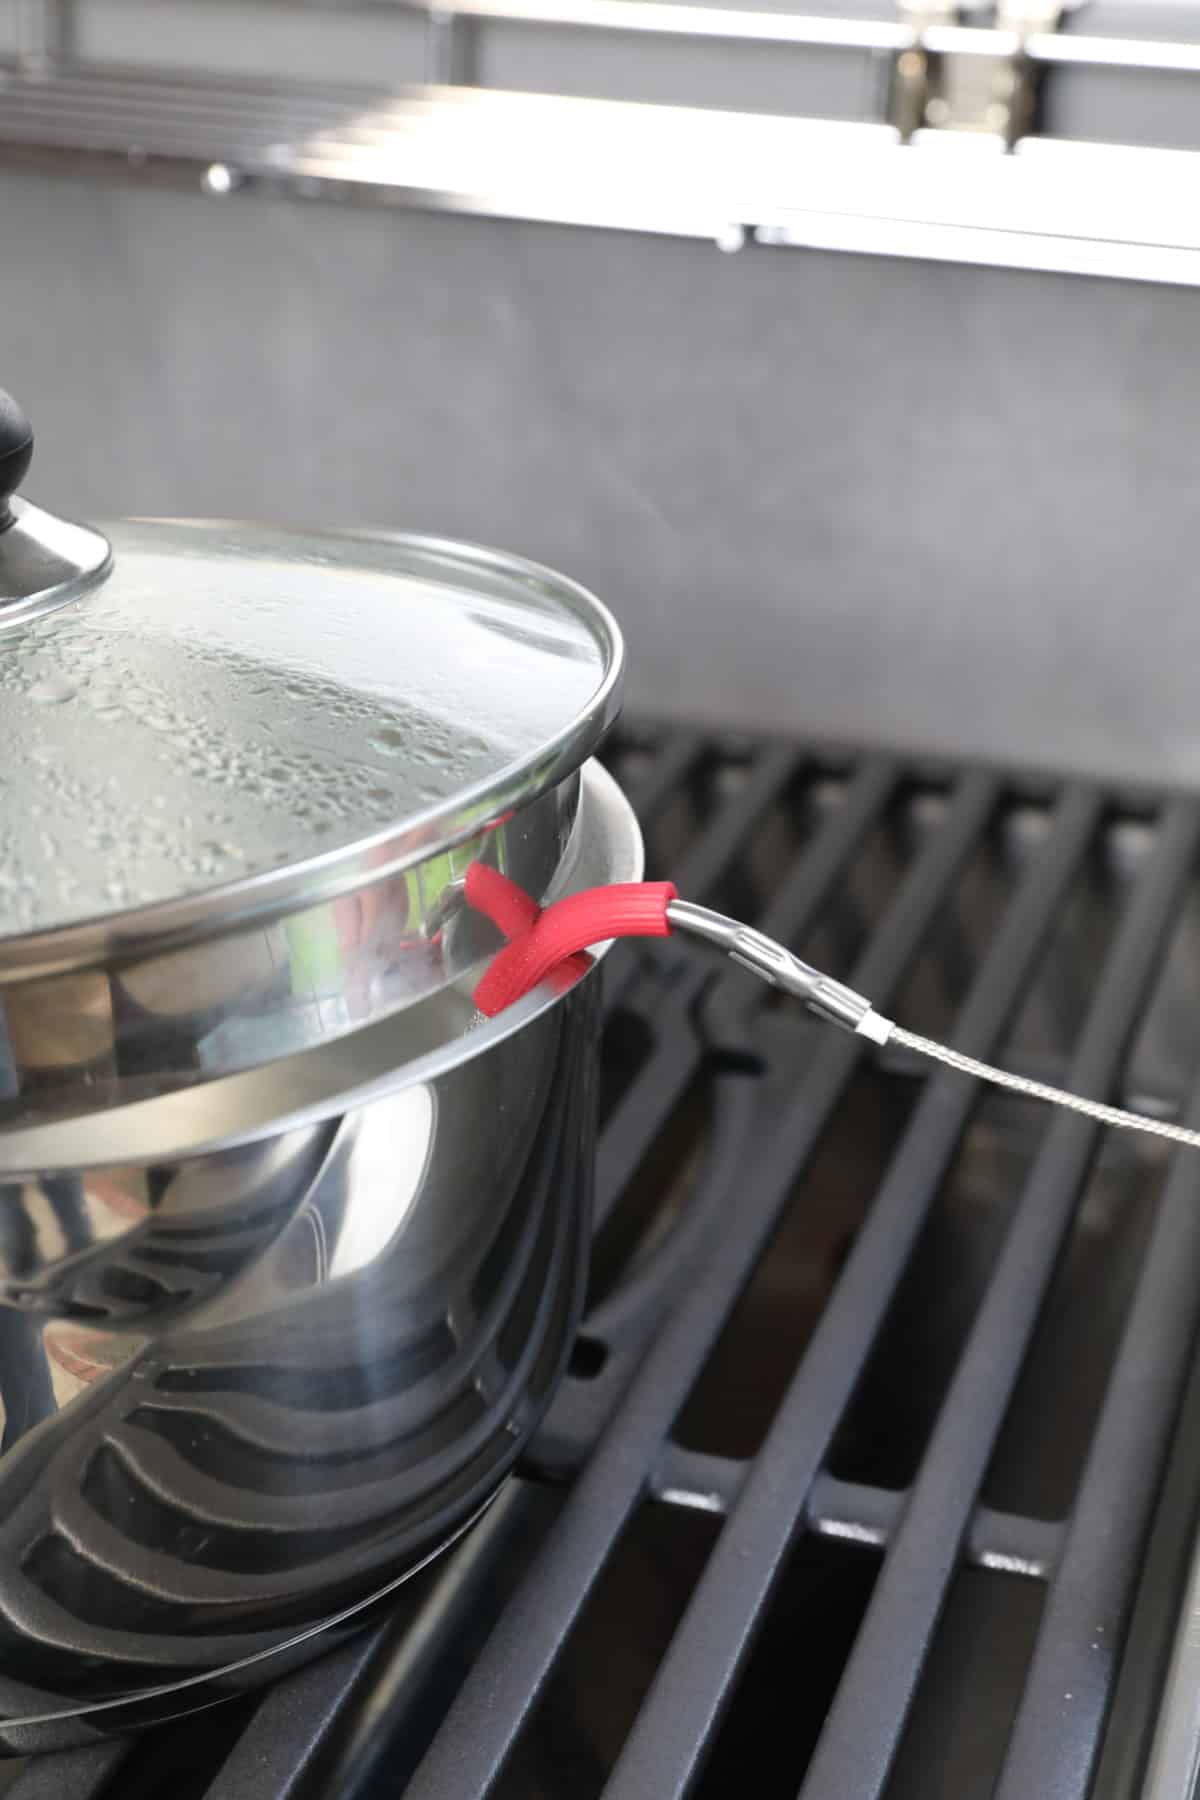 Weber iGrill 3 thermometer food probe in a pan of boiling water.